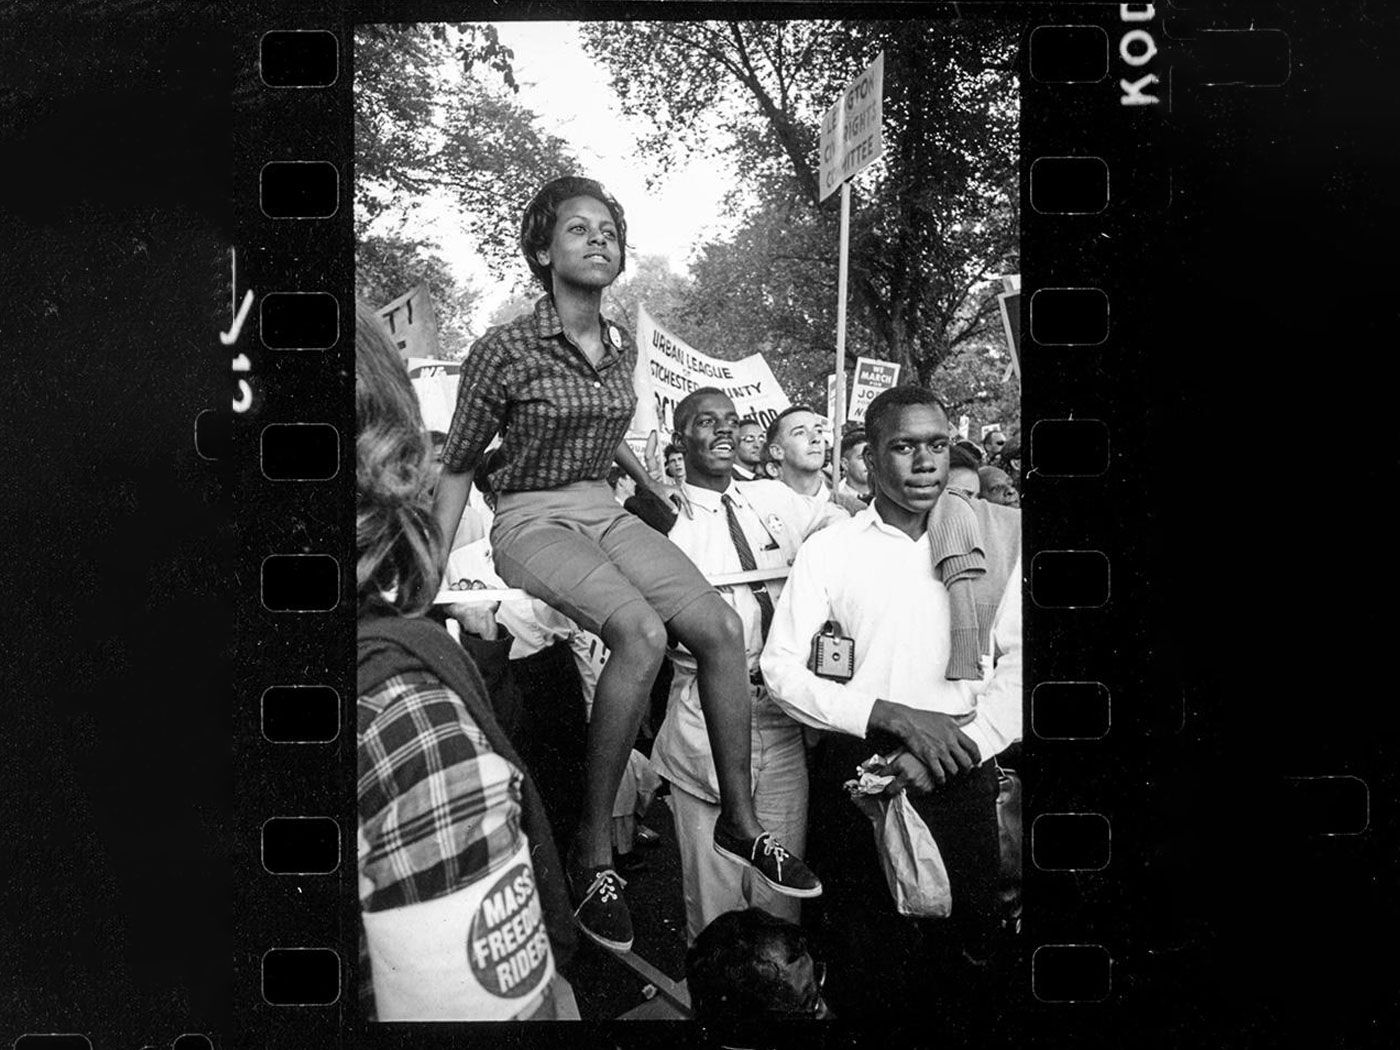 Freedom Riders at the March on Washington